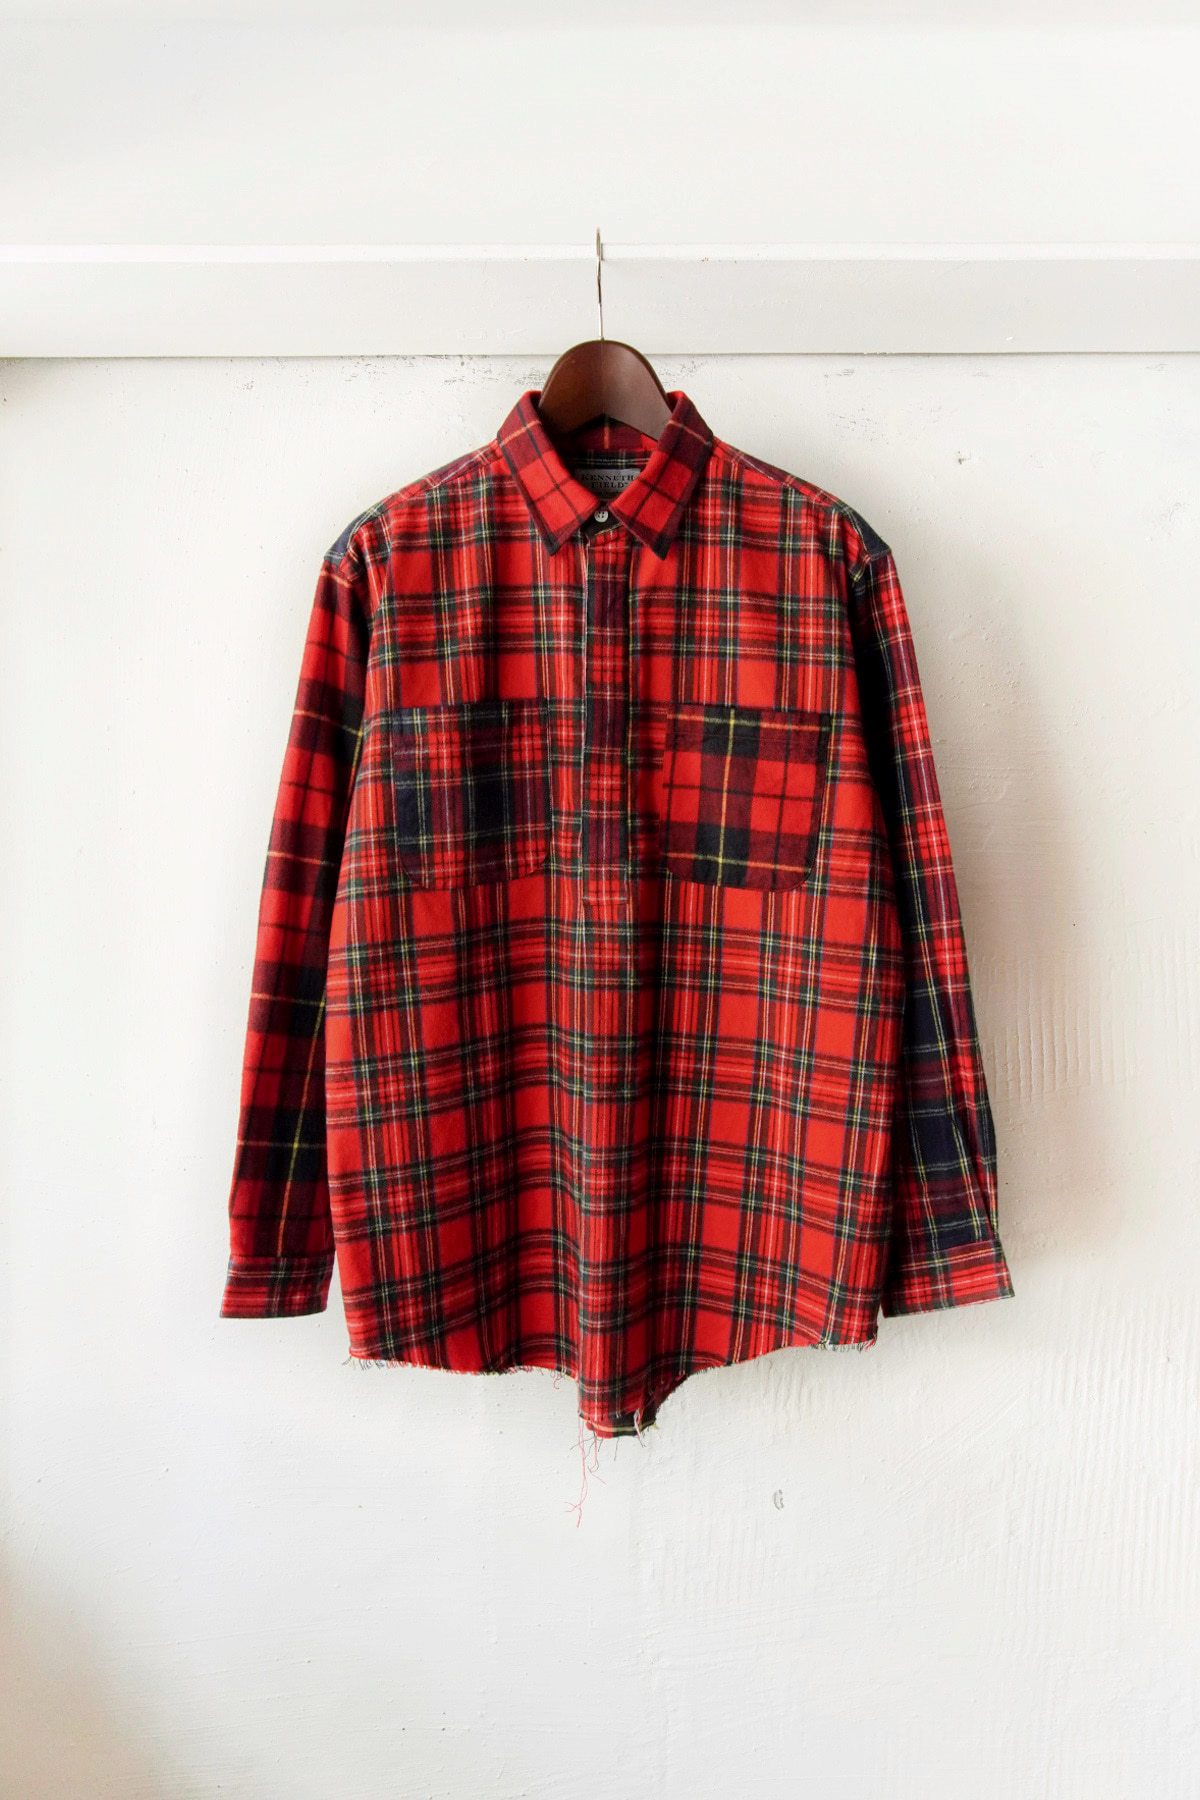 [KENNETH FIELD] Roomy Shirt - Flannel Check Red